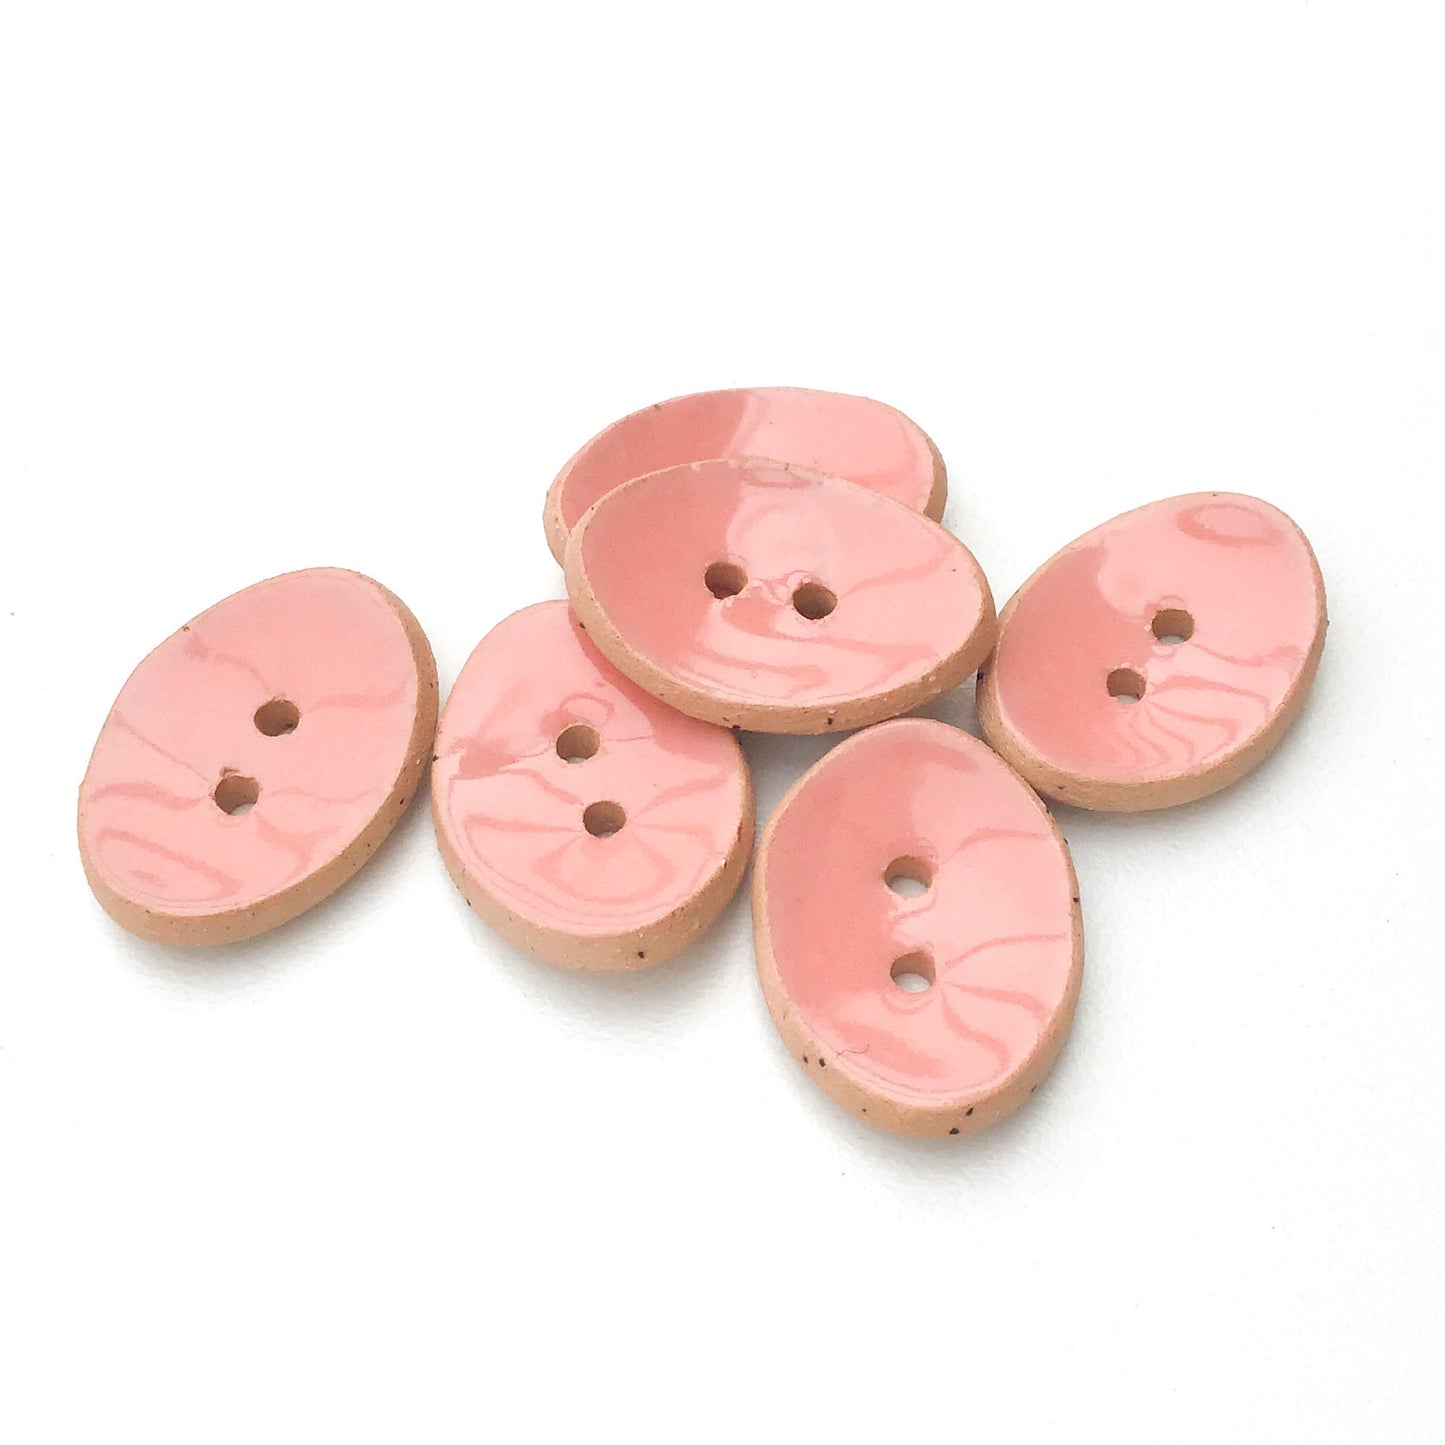 Oval Ceramic Buttons - Light Coral Pink Clay Buttons - 5/8" x 7/8" - 6 Pack